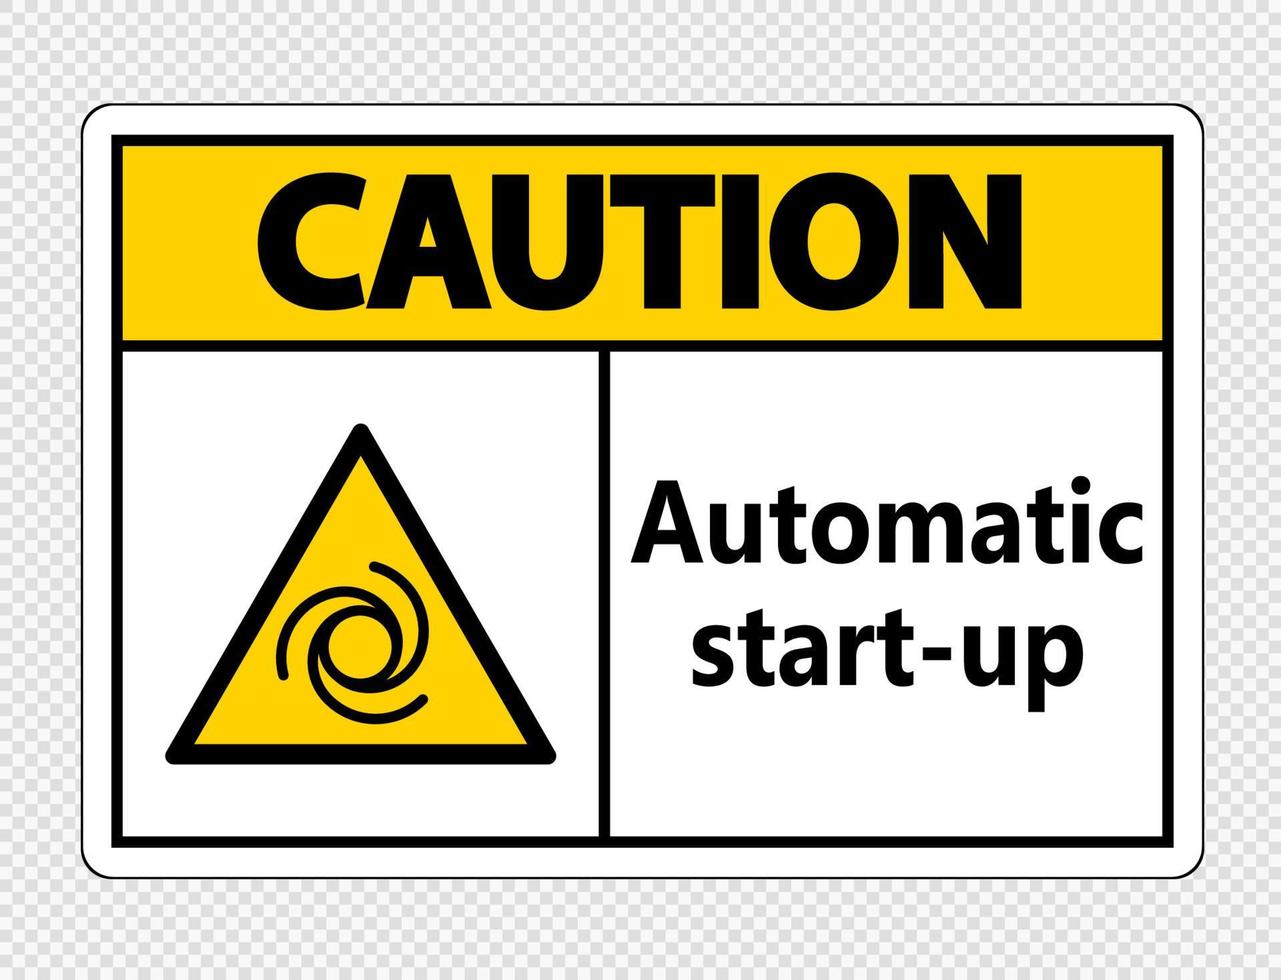 Caution automatic start-up sign on transparent background vector